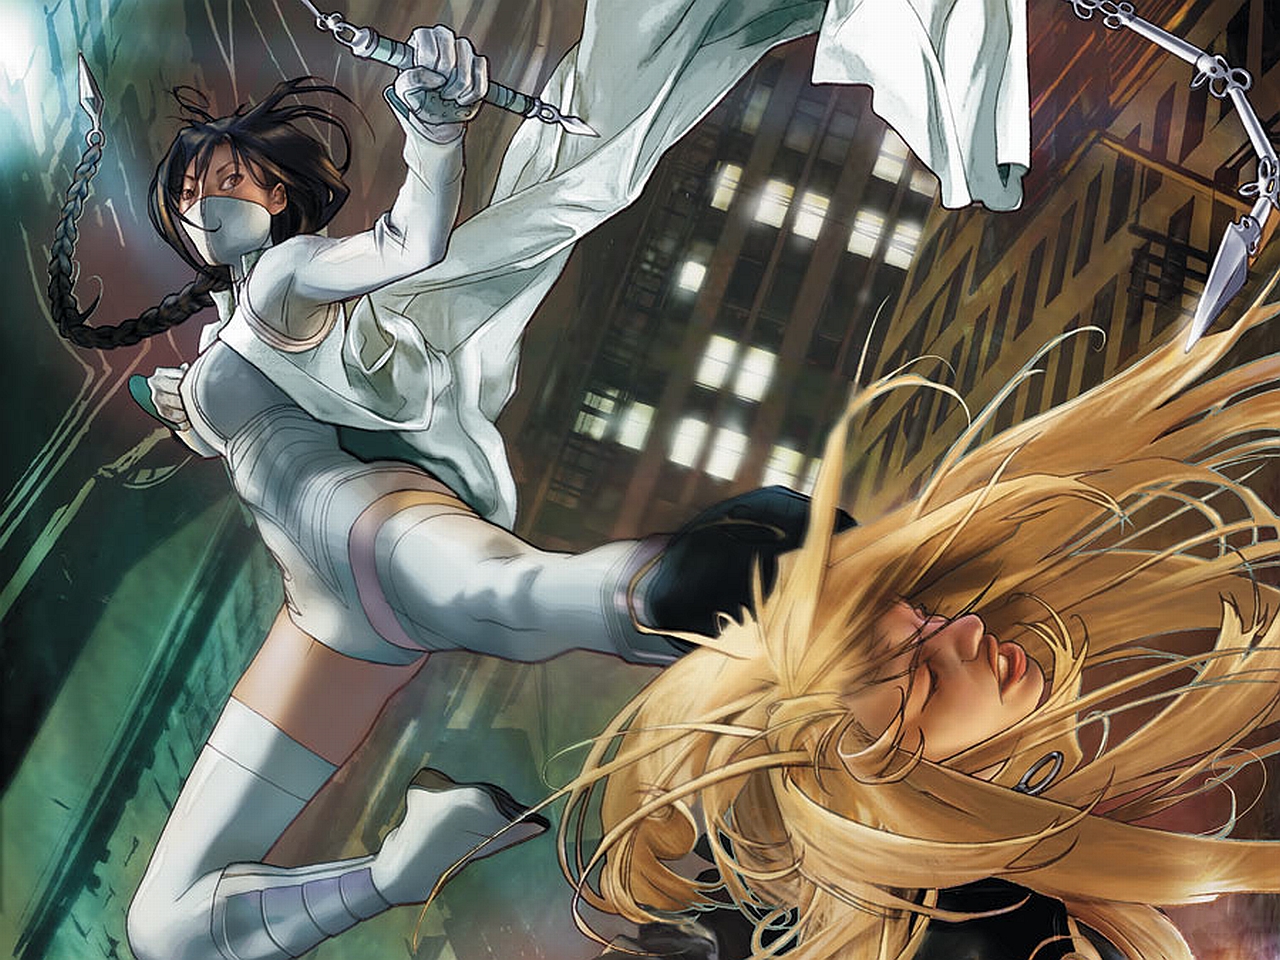 Download white canary dc comics s for ile phone free white canary dc comics hd pictures